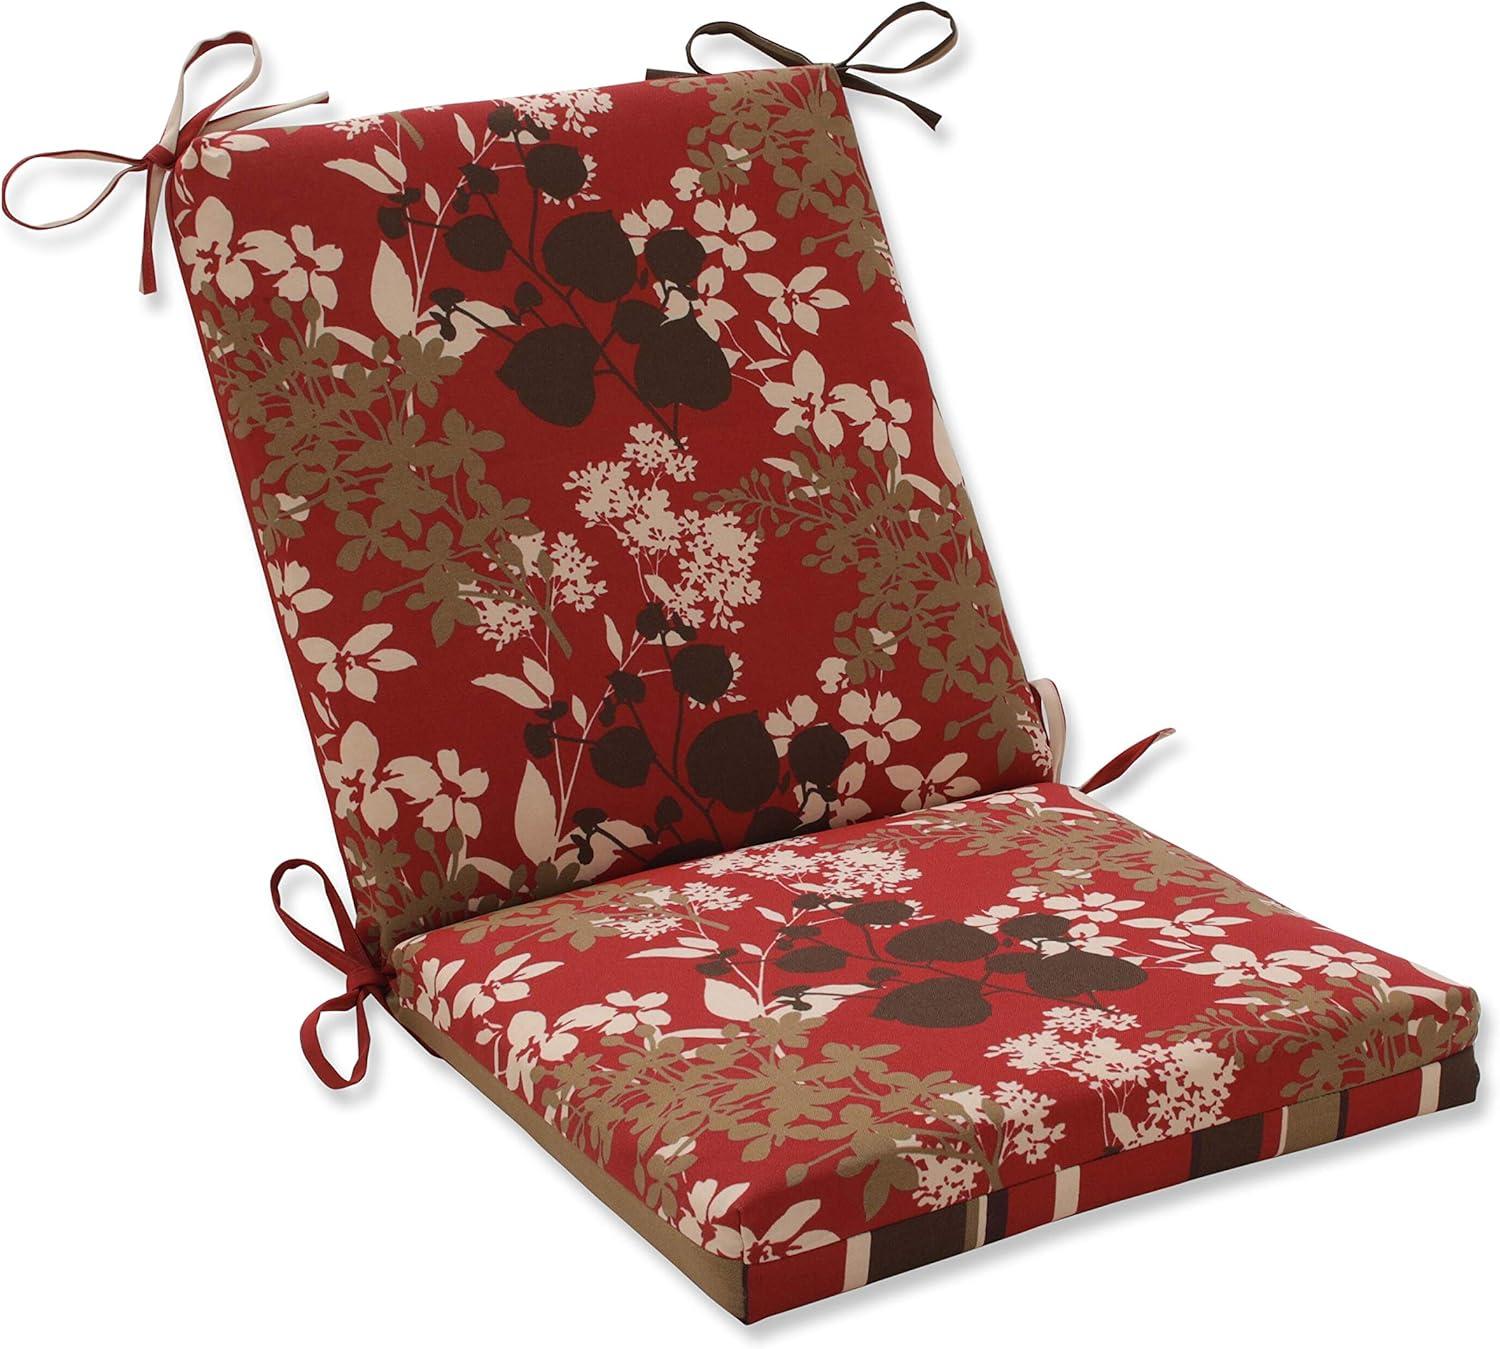 Modern Floral & Stripe Reversible Outdoor Chair Cushion, Brown/Red